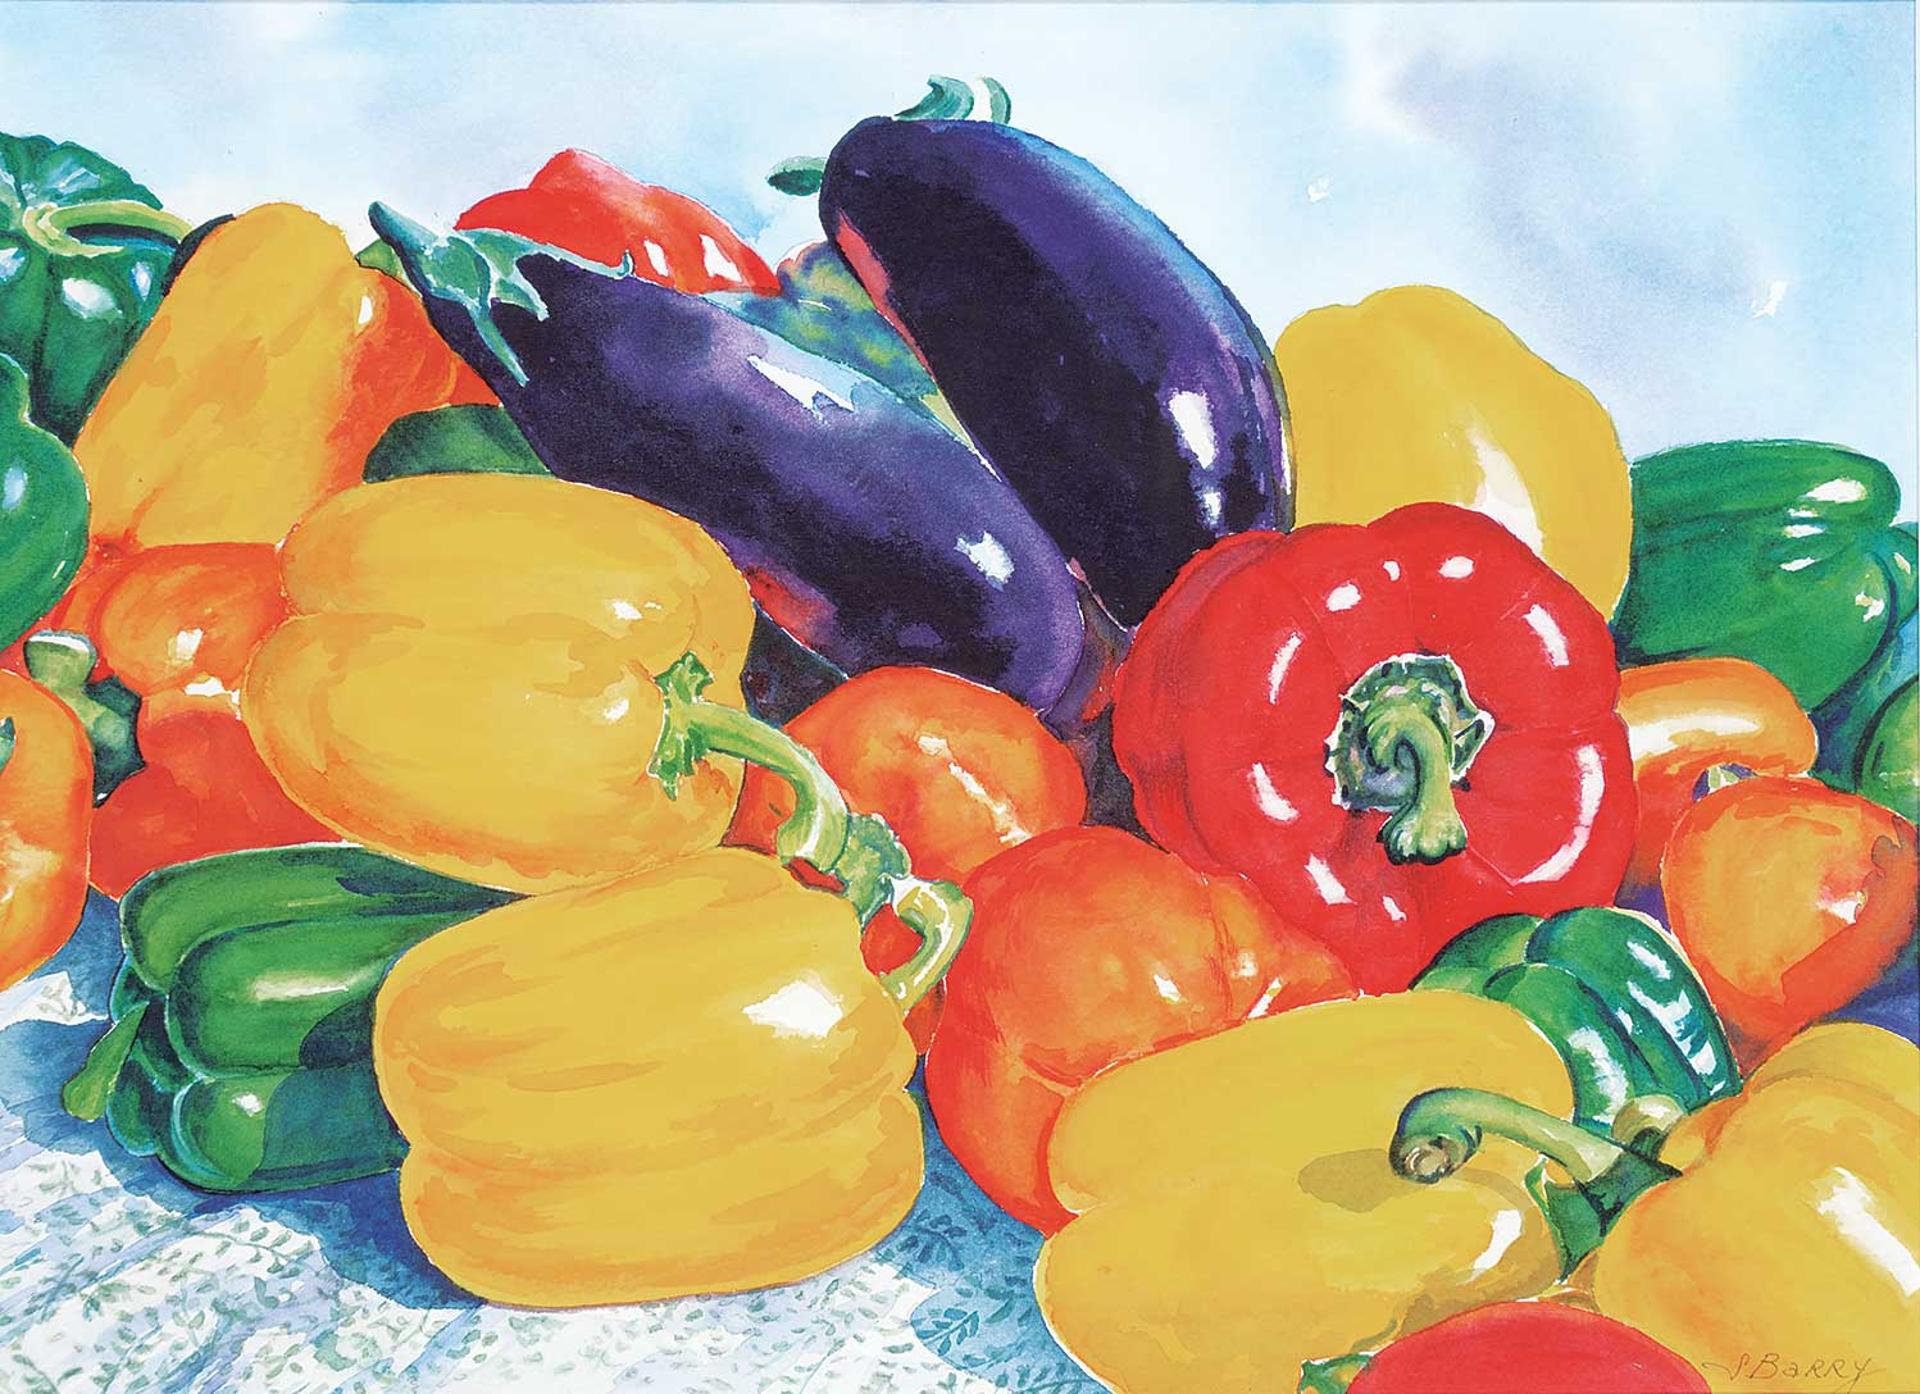 June Barry - Untitled - Aubergine and Peppers